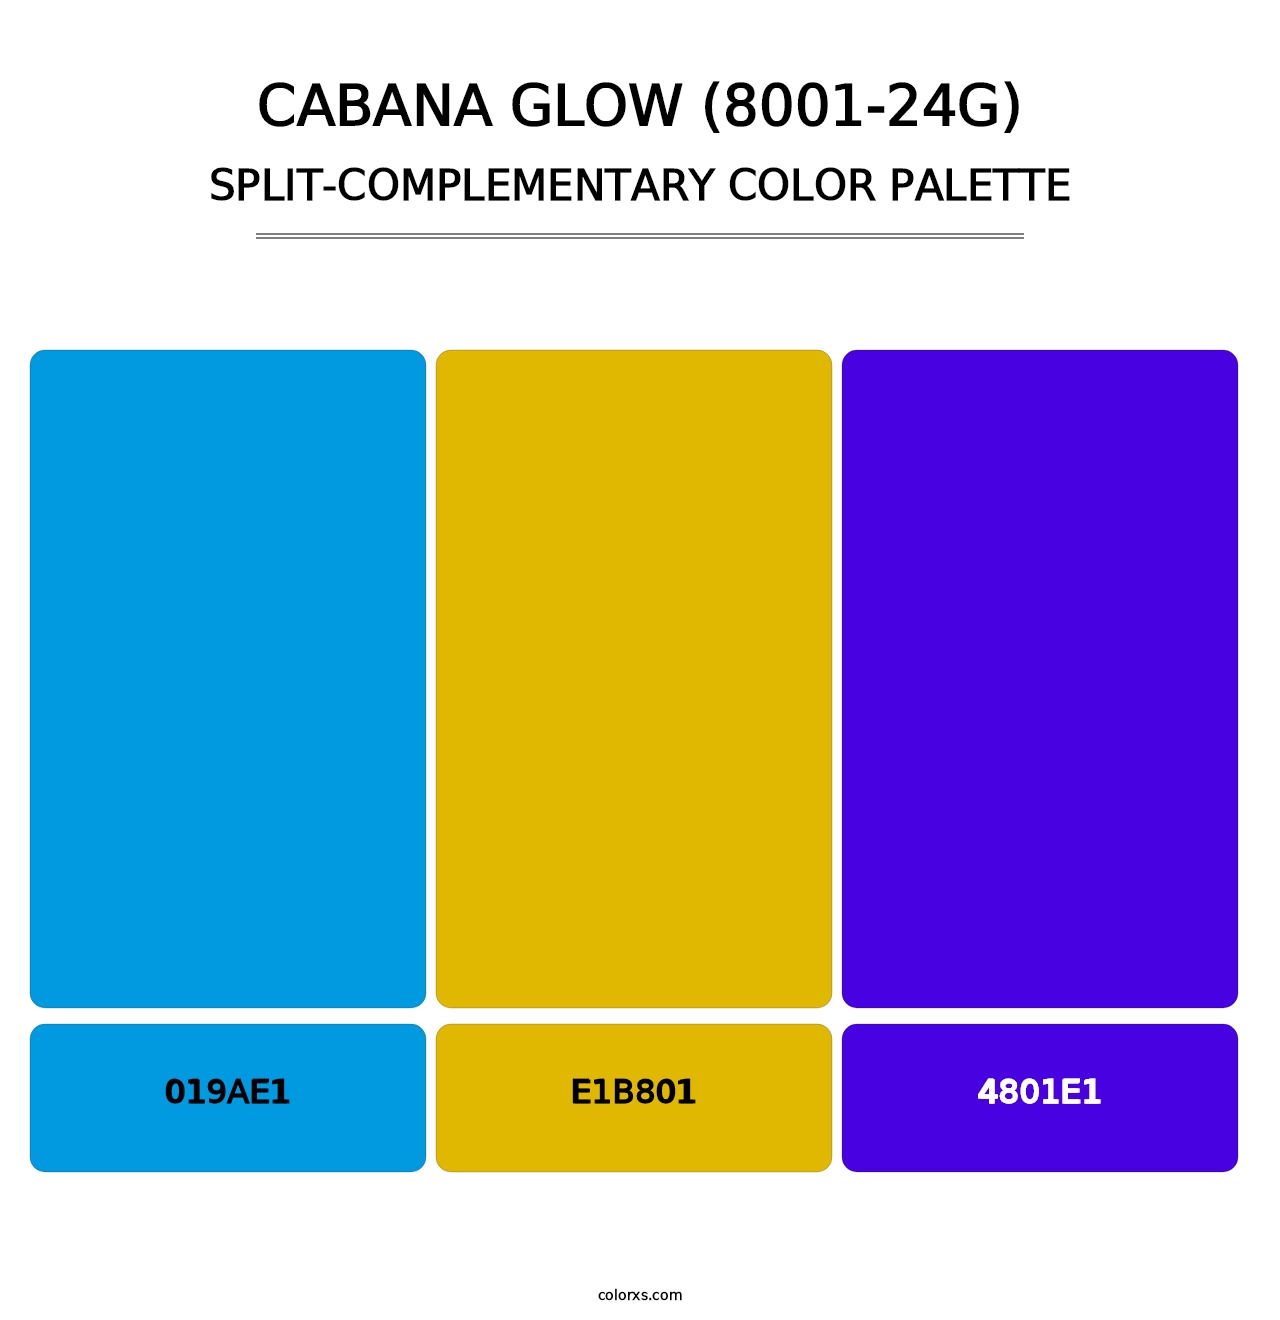 Cabana Glow (8001-24G) - Split-Complementary Color Palette